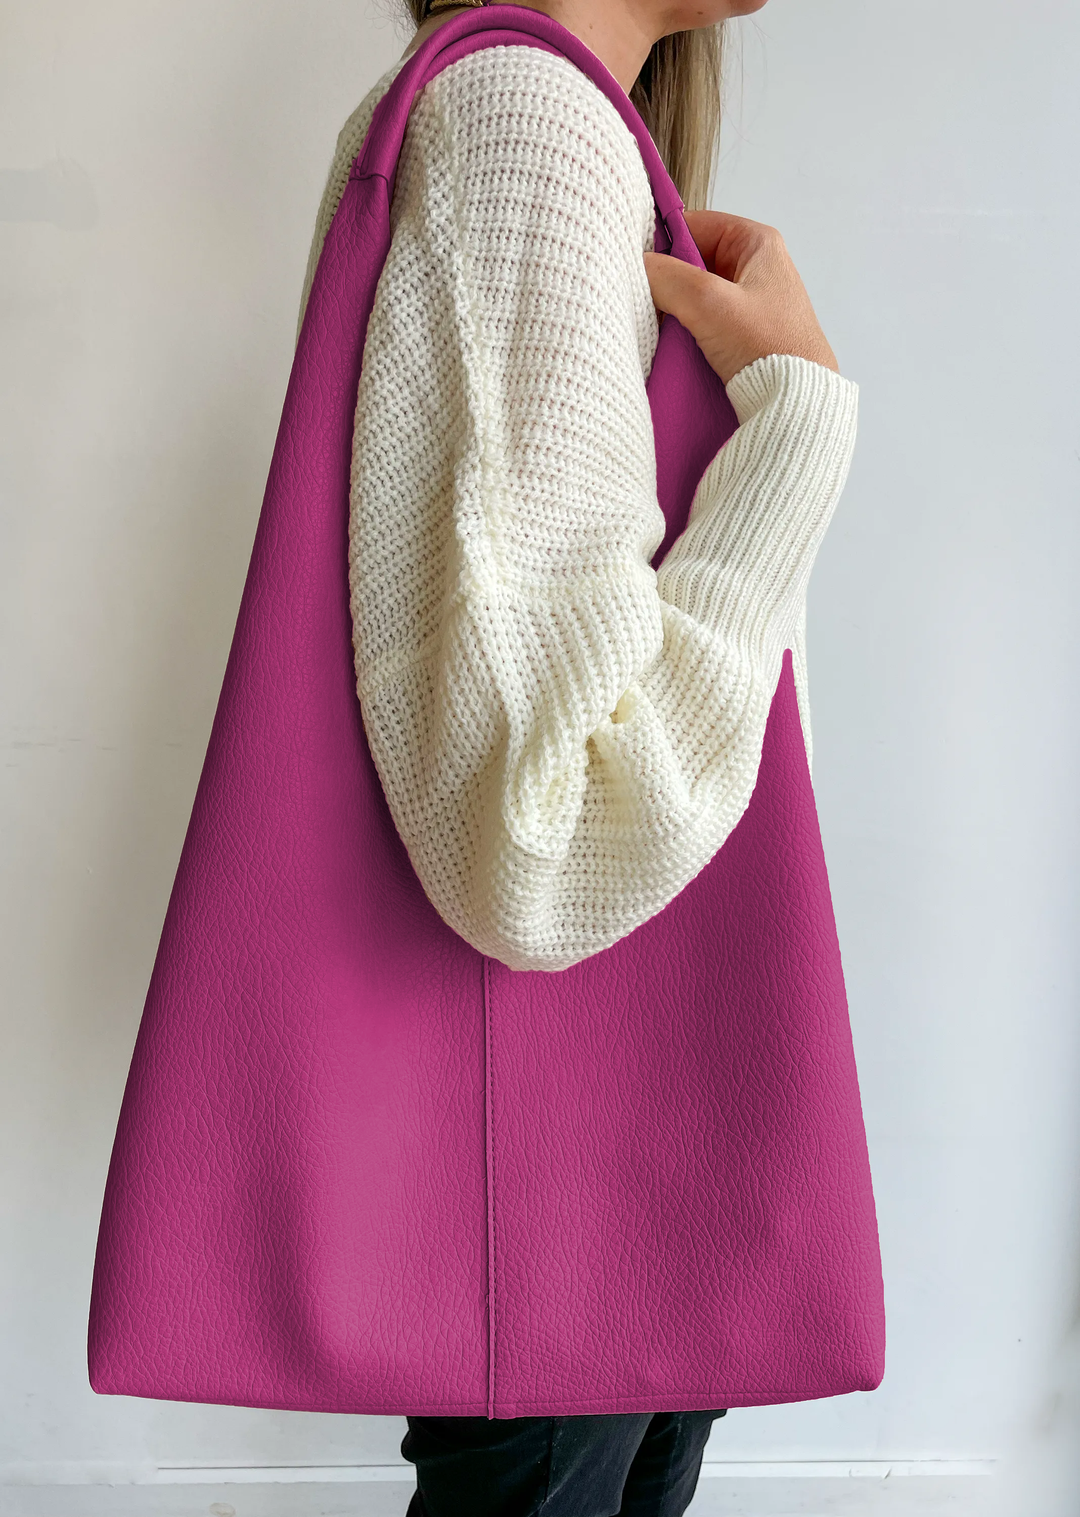 PInk Slouch tote bag